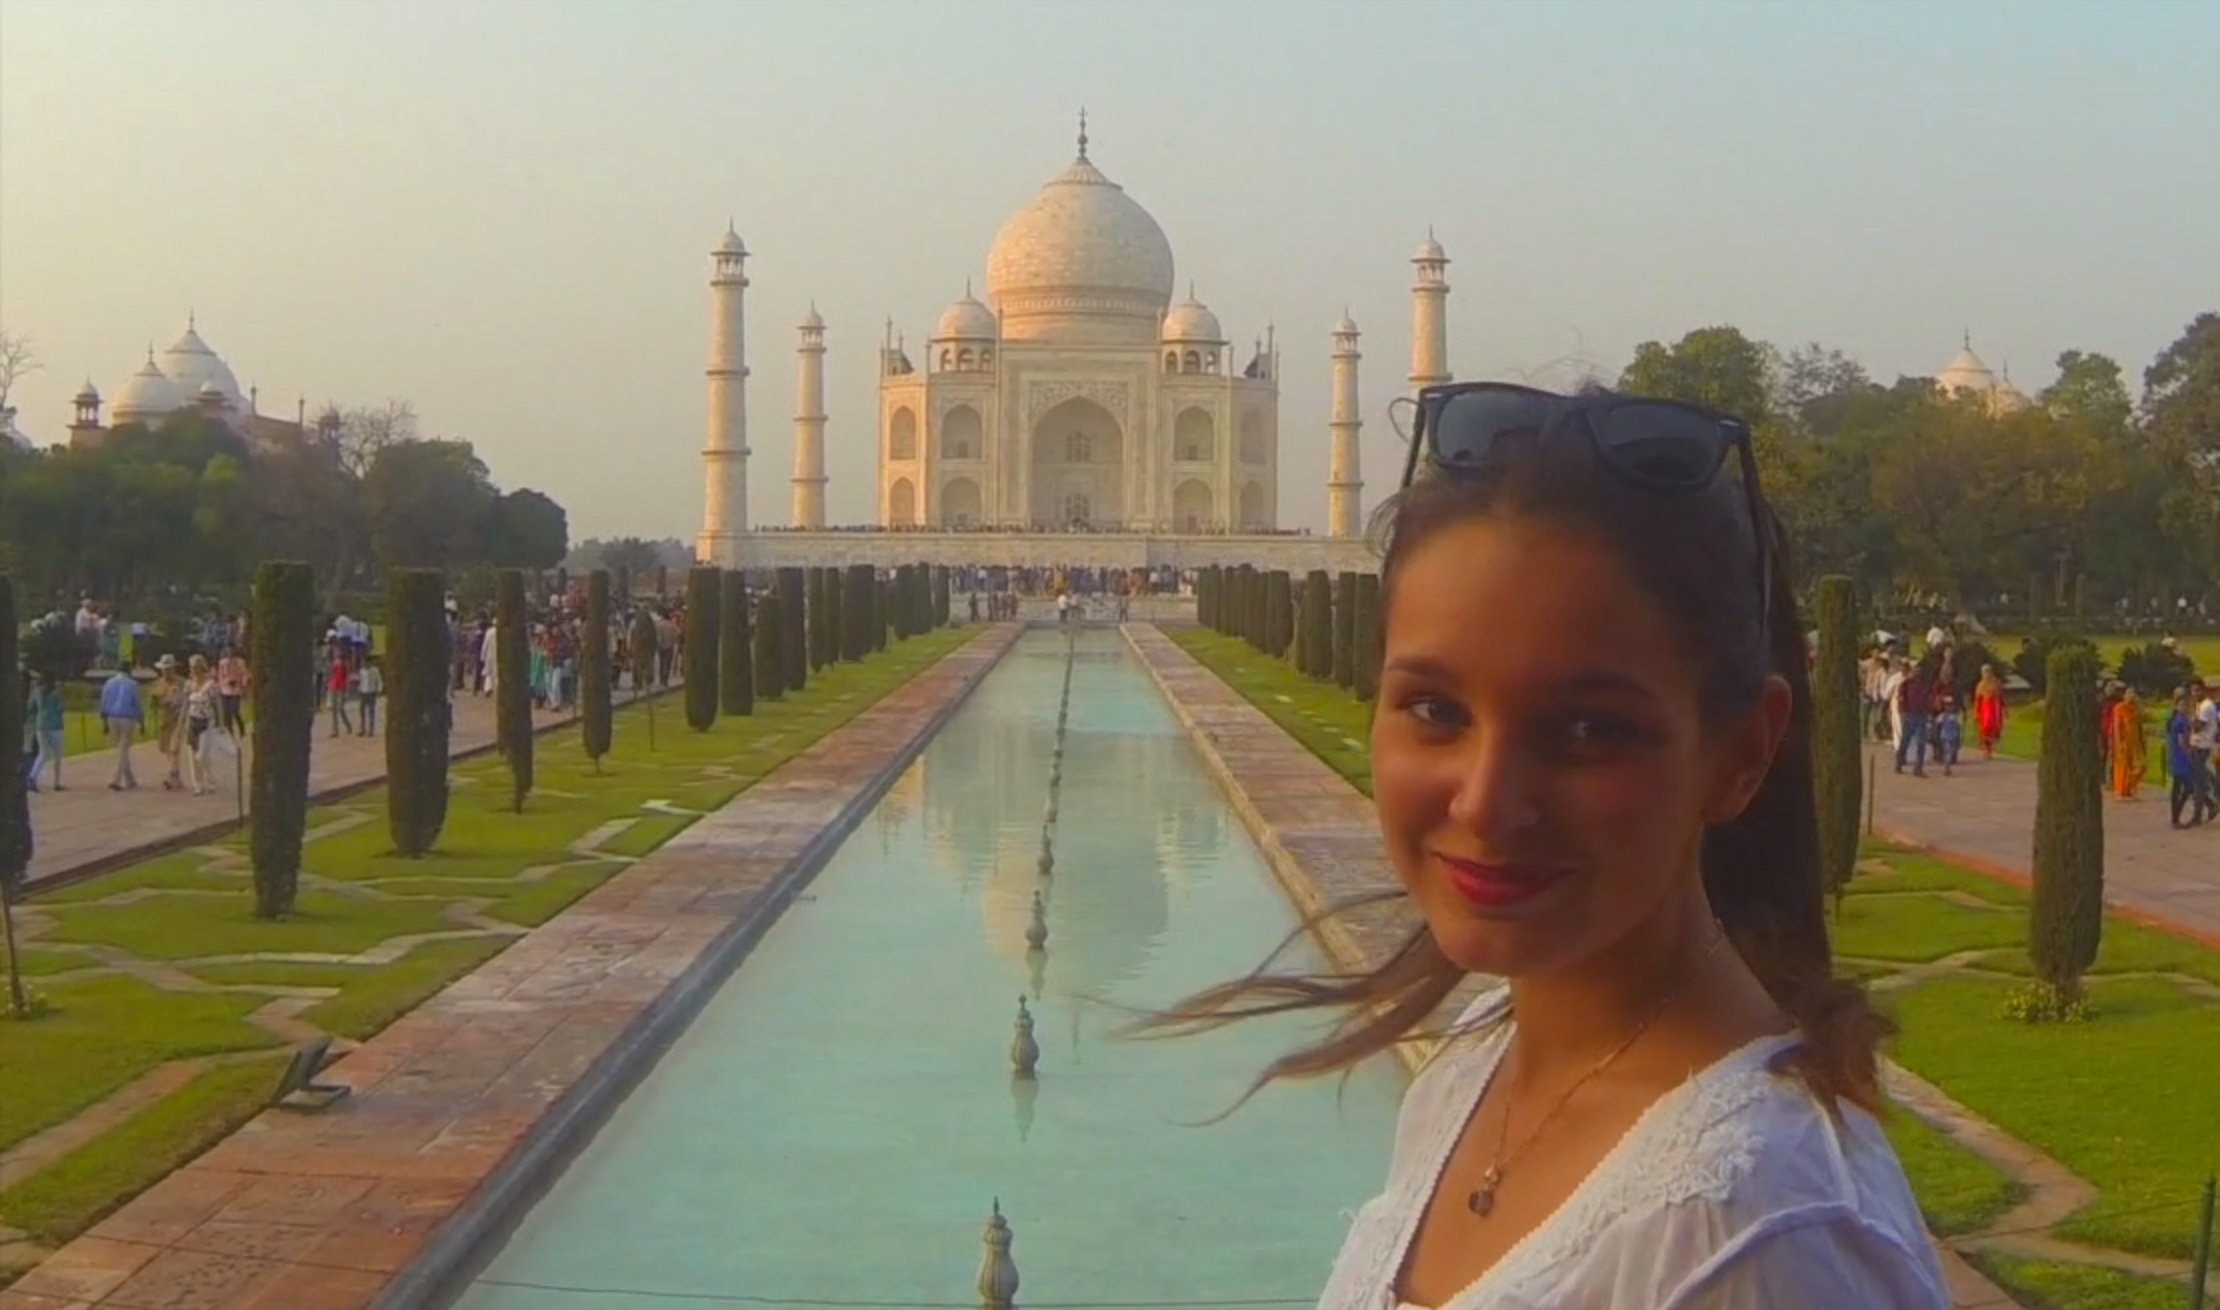 North India // A GoPro Video